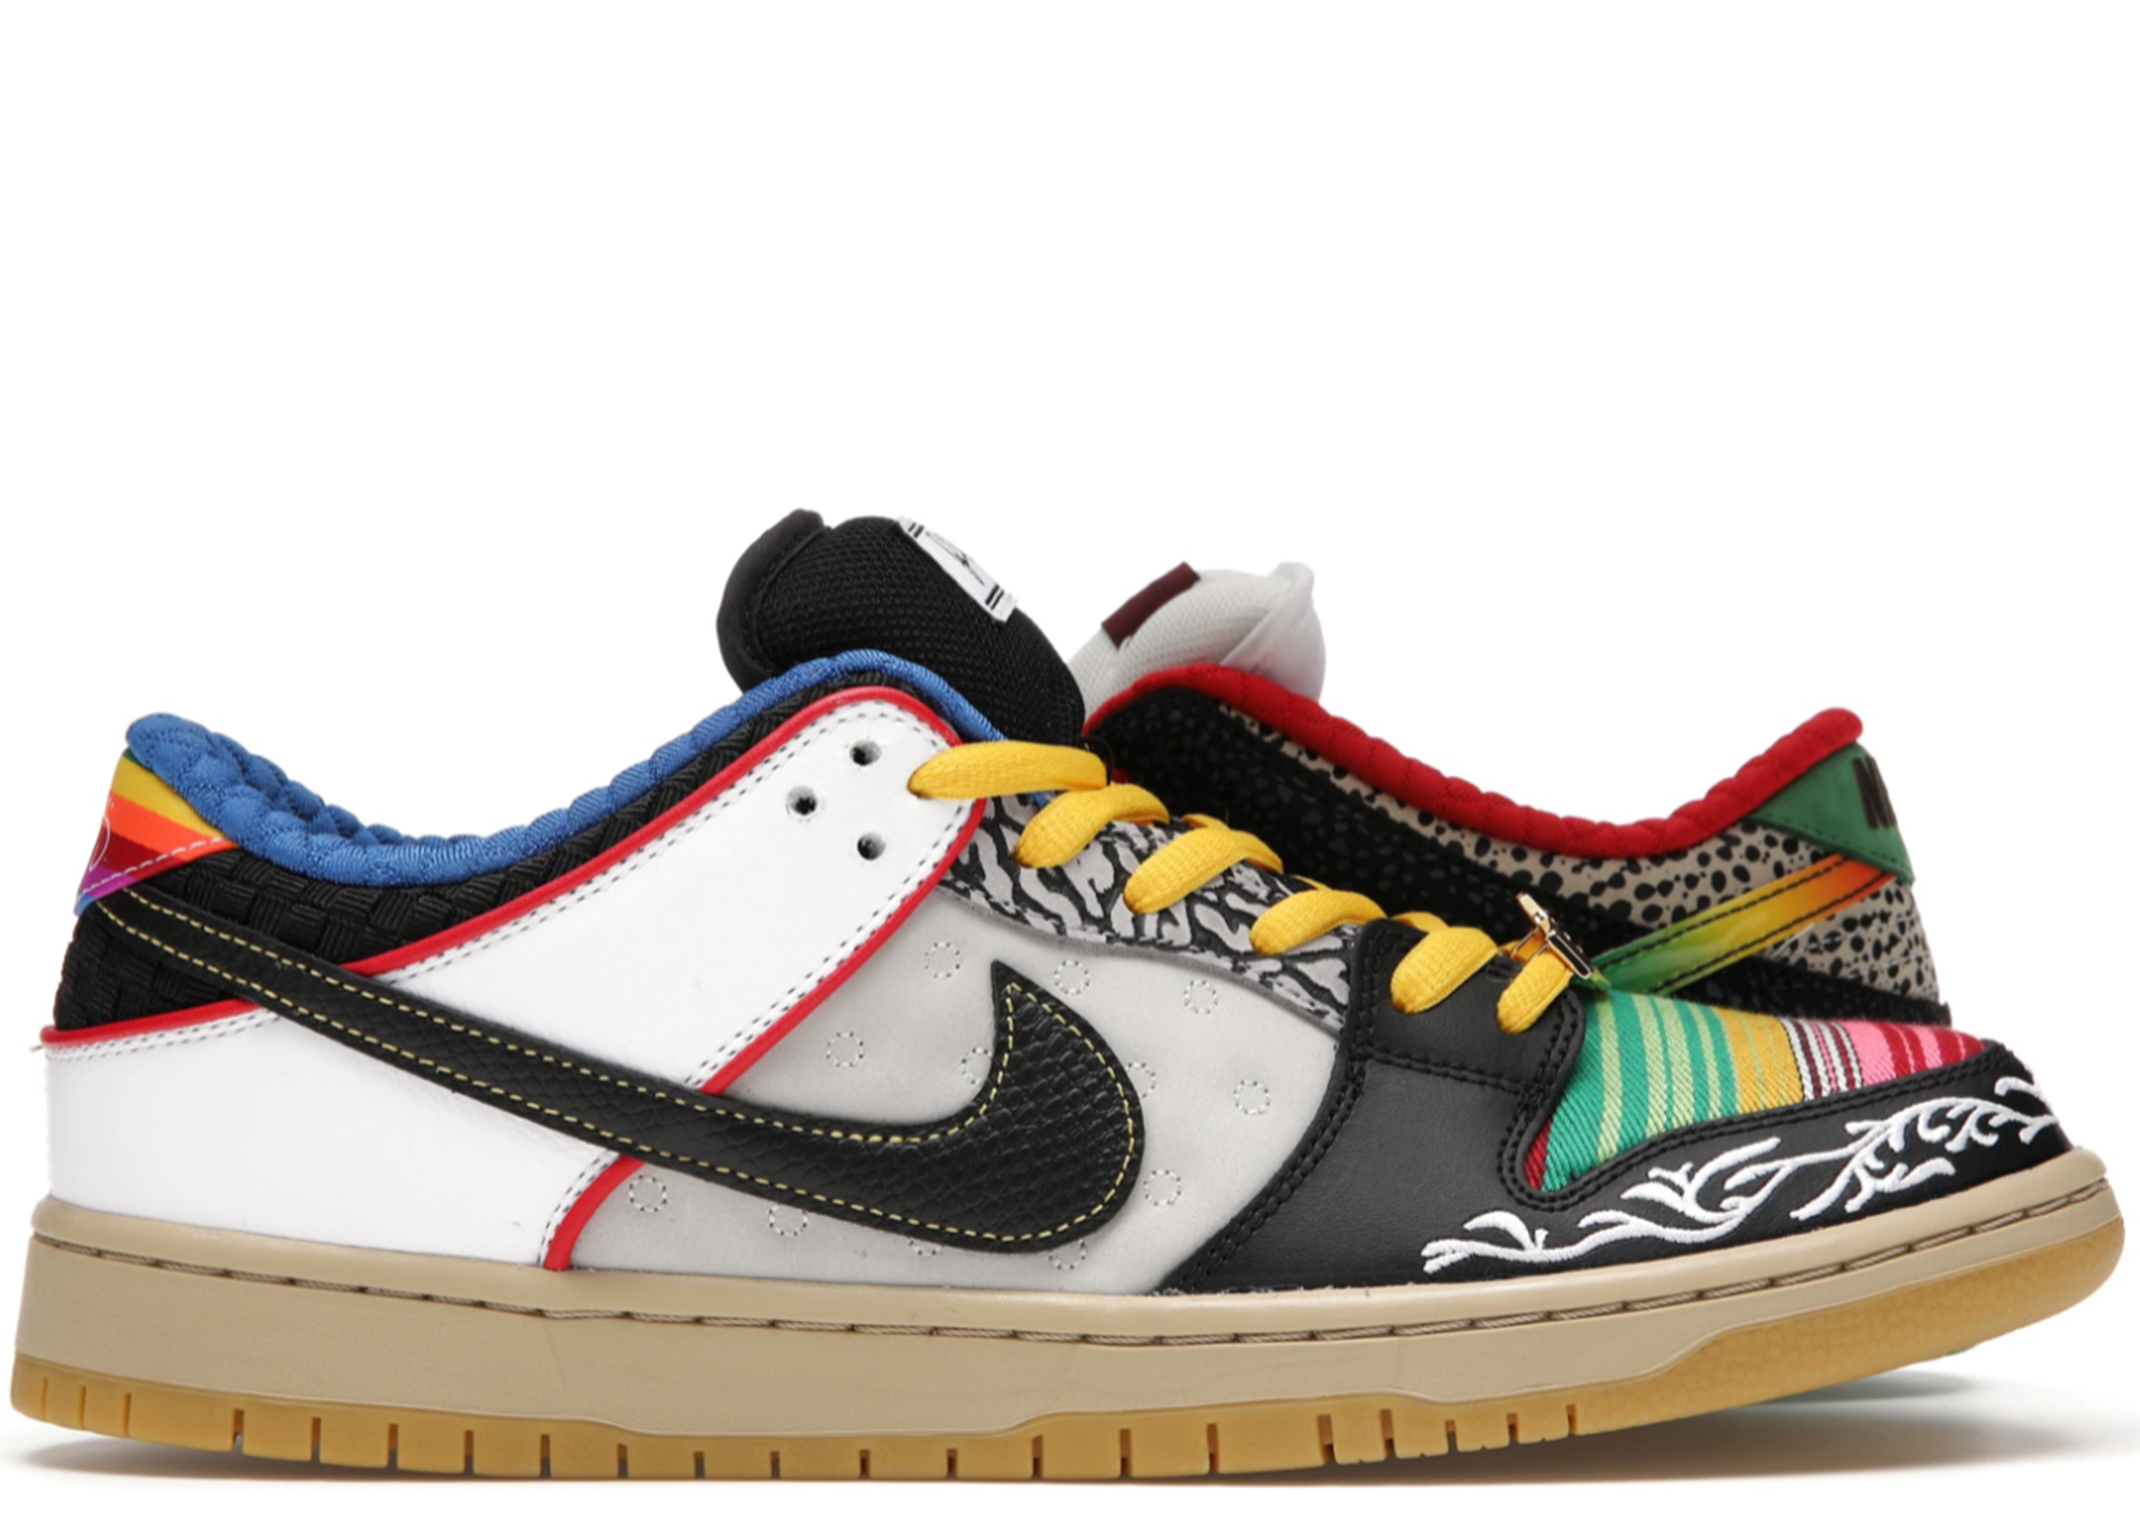 Nike SB Dunk Low What The Paul - Undefined Market